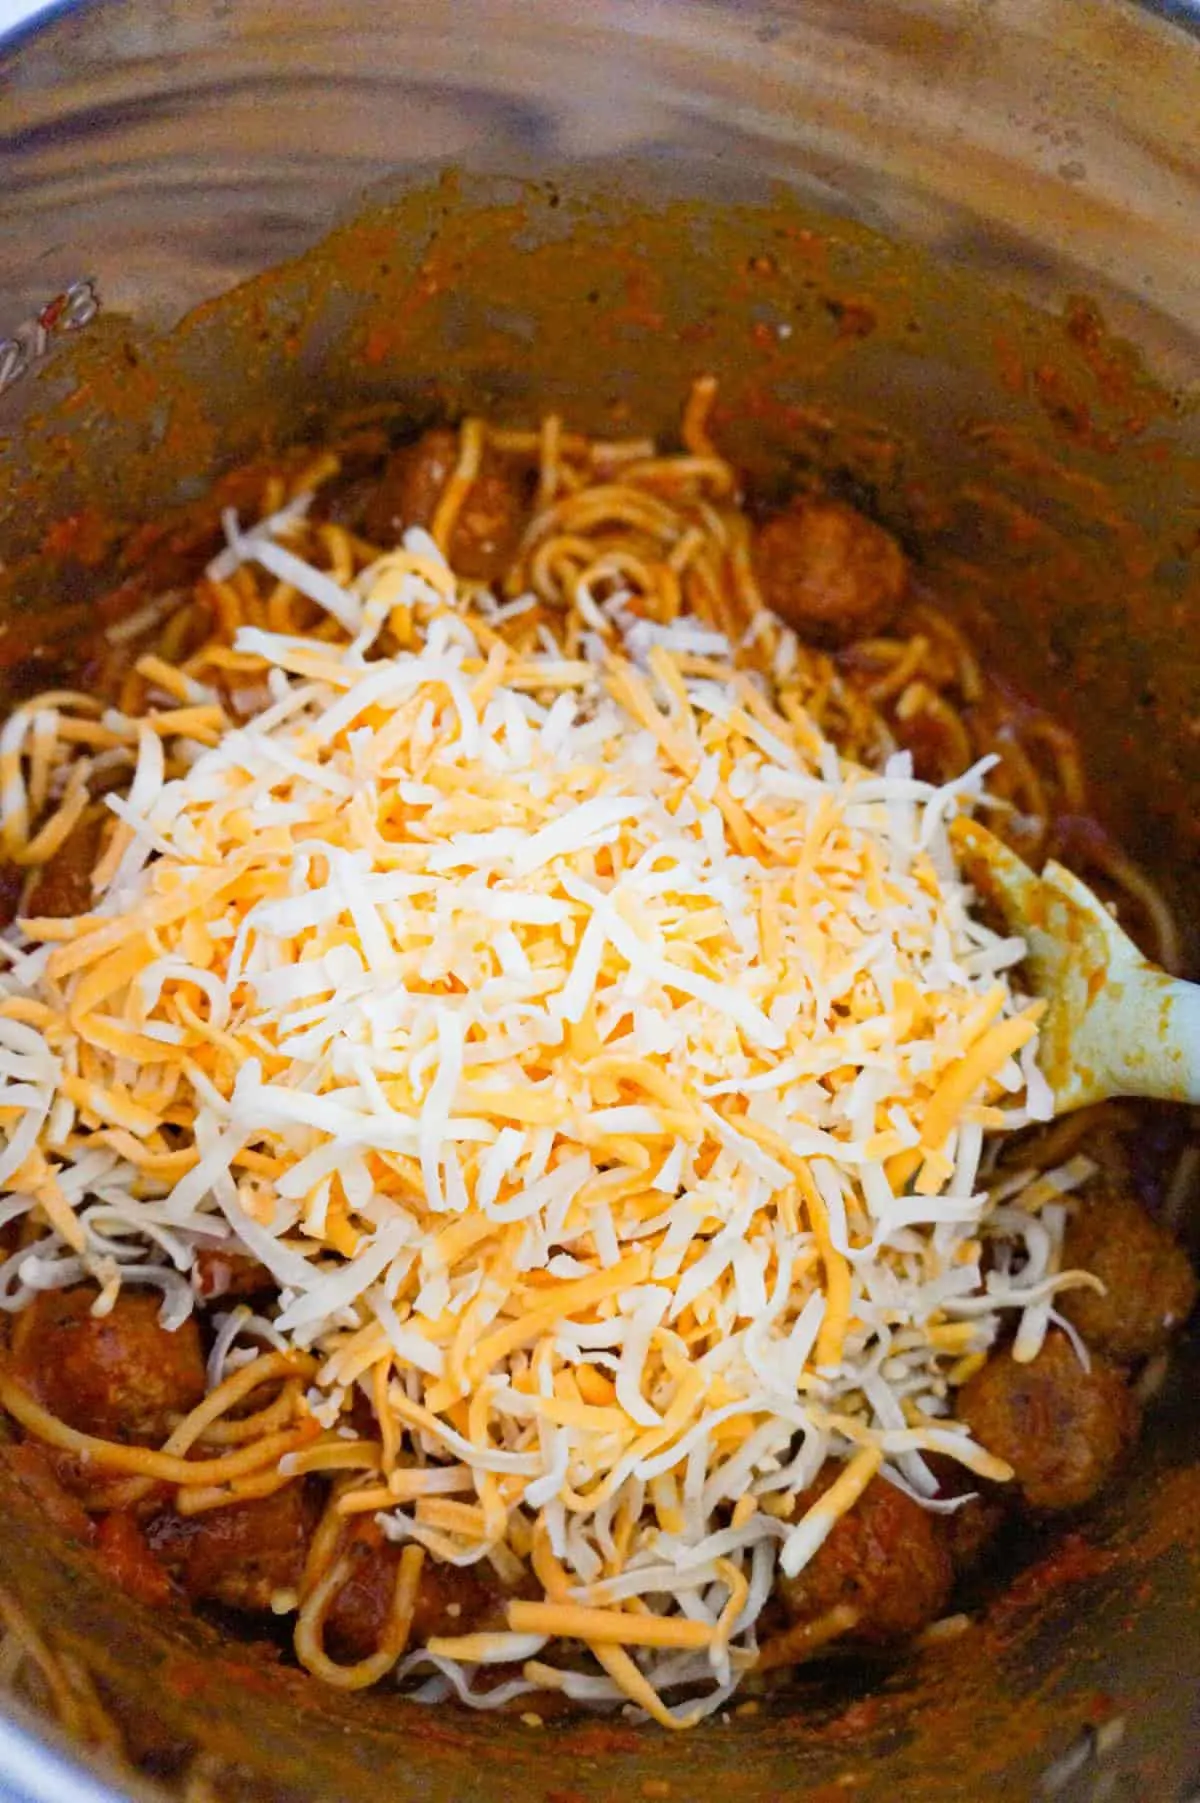 shredded mozzarella and cheddar cheese on top of spaghetti and meatballs in an Instant Pot